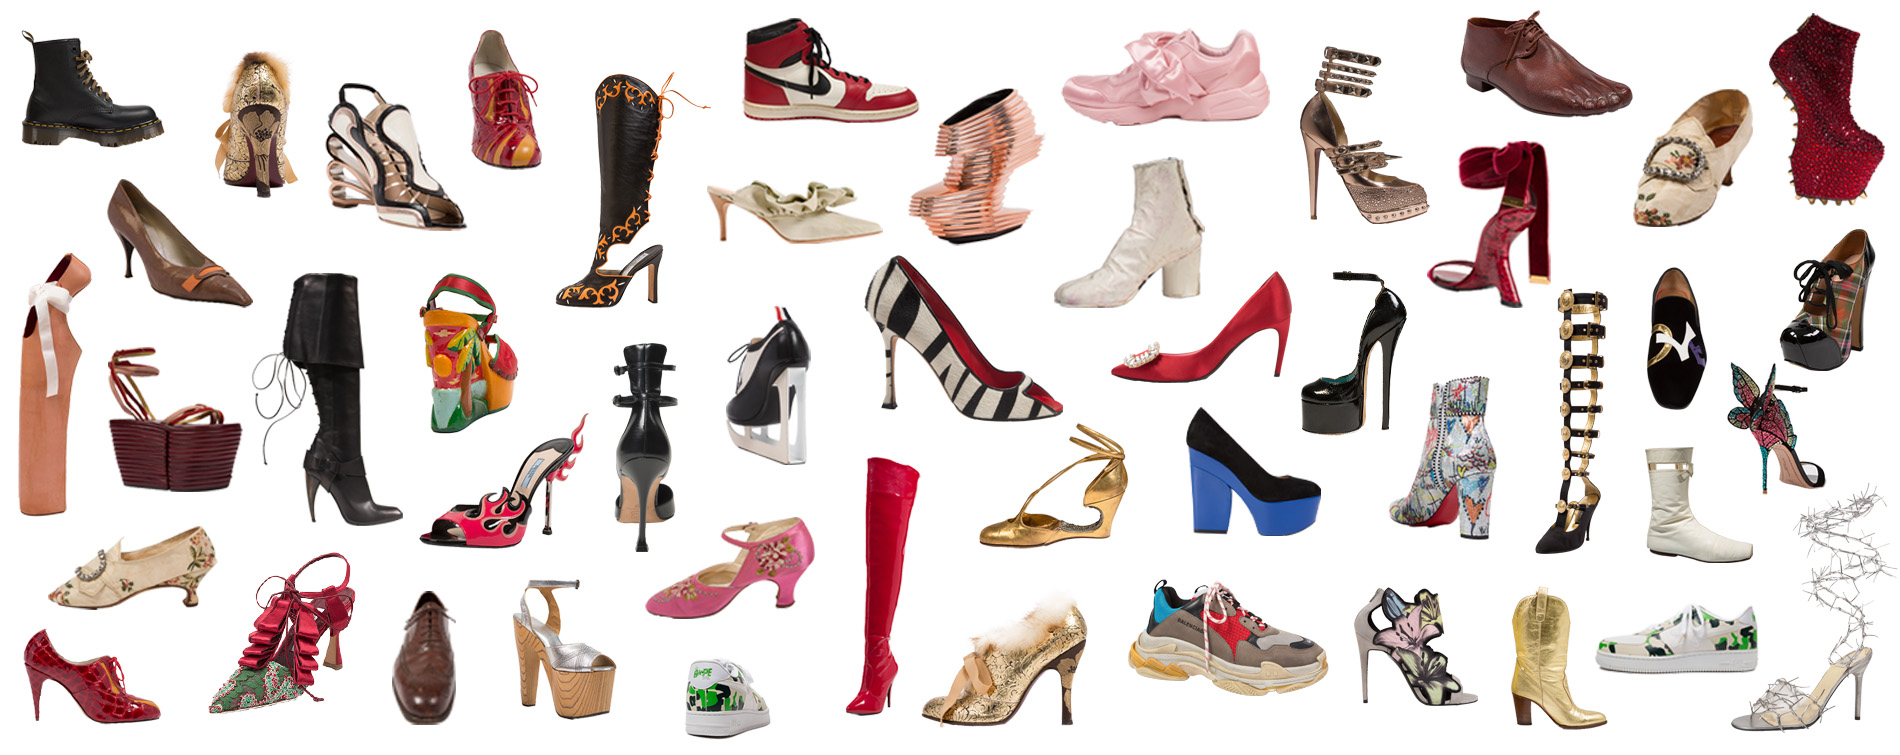 graphic collage of some of the shoes featured in Shoes: Anatomy, Identity, Magic